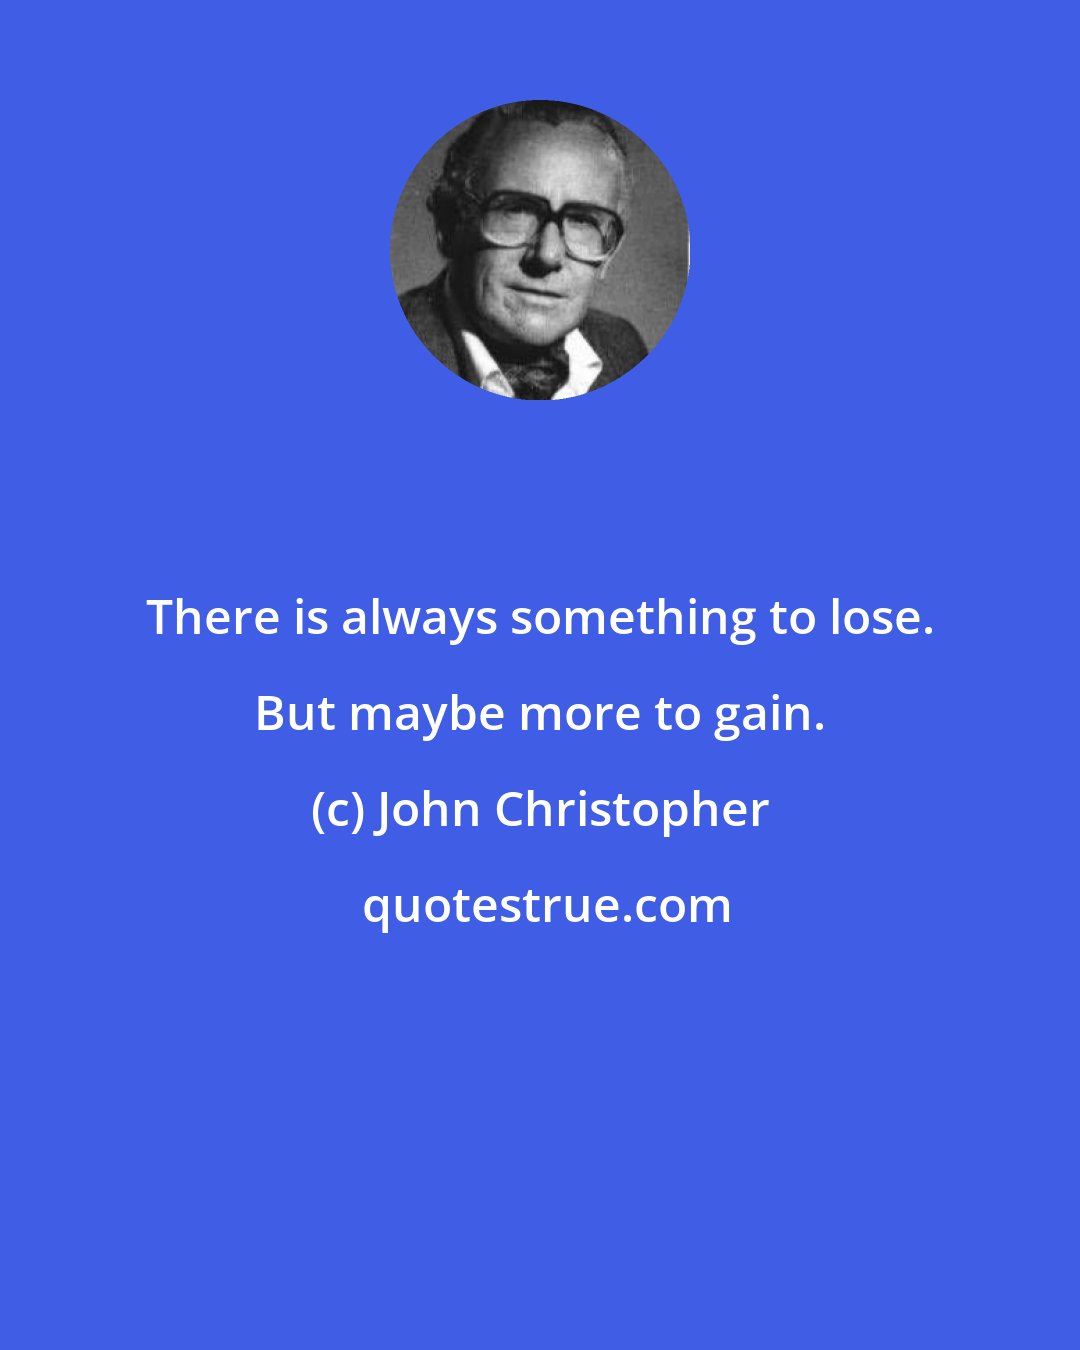 John Christopher: There is always something to lose. But maybe more to gain.